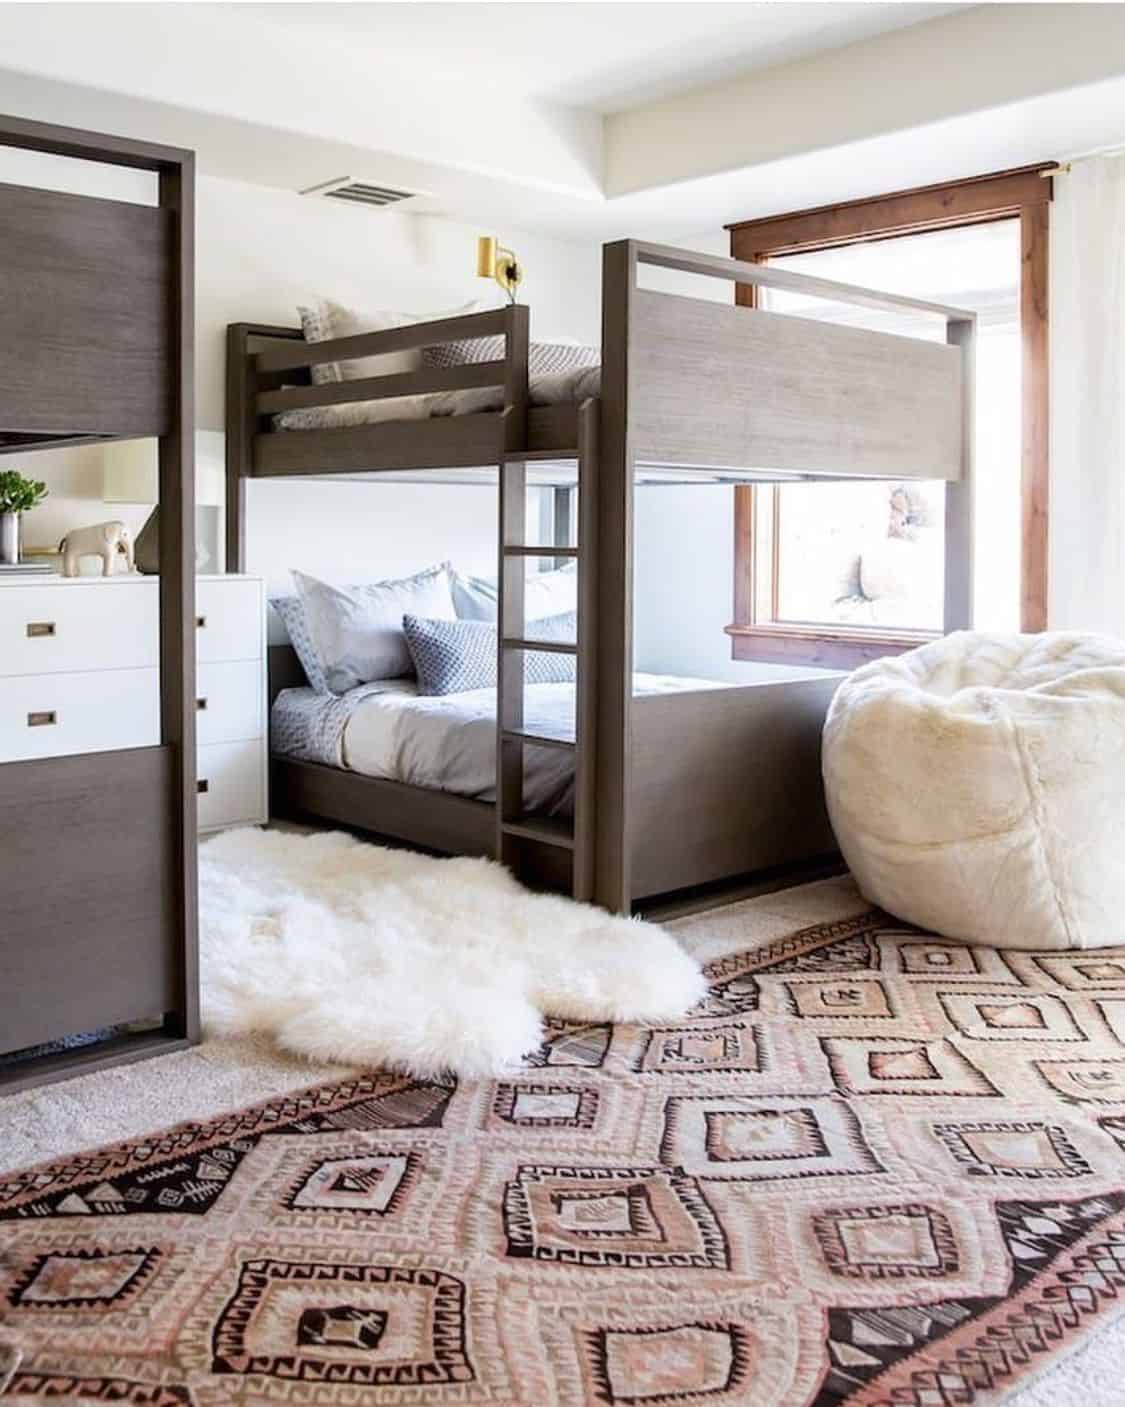 Updating Your Bunk Beds, Bunk Bed Room